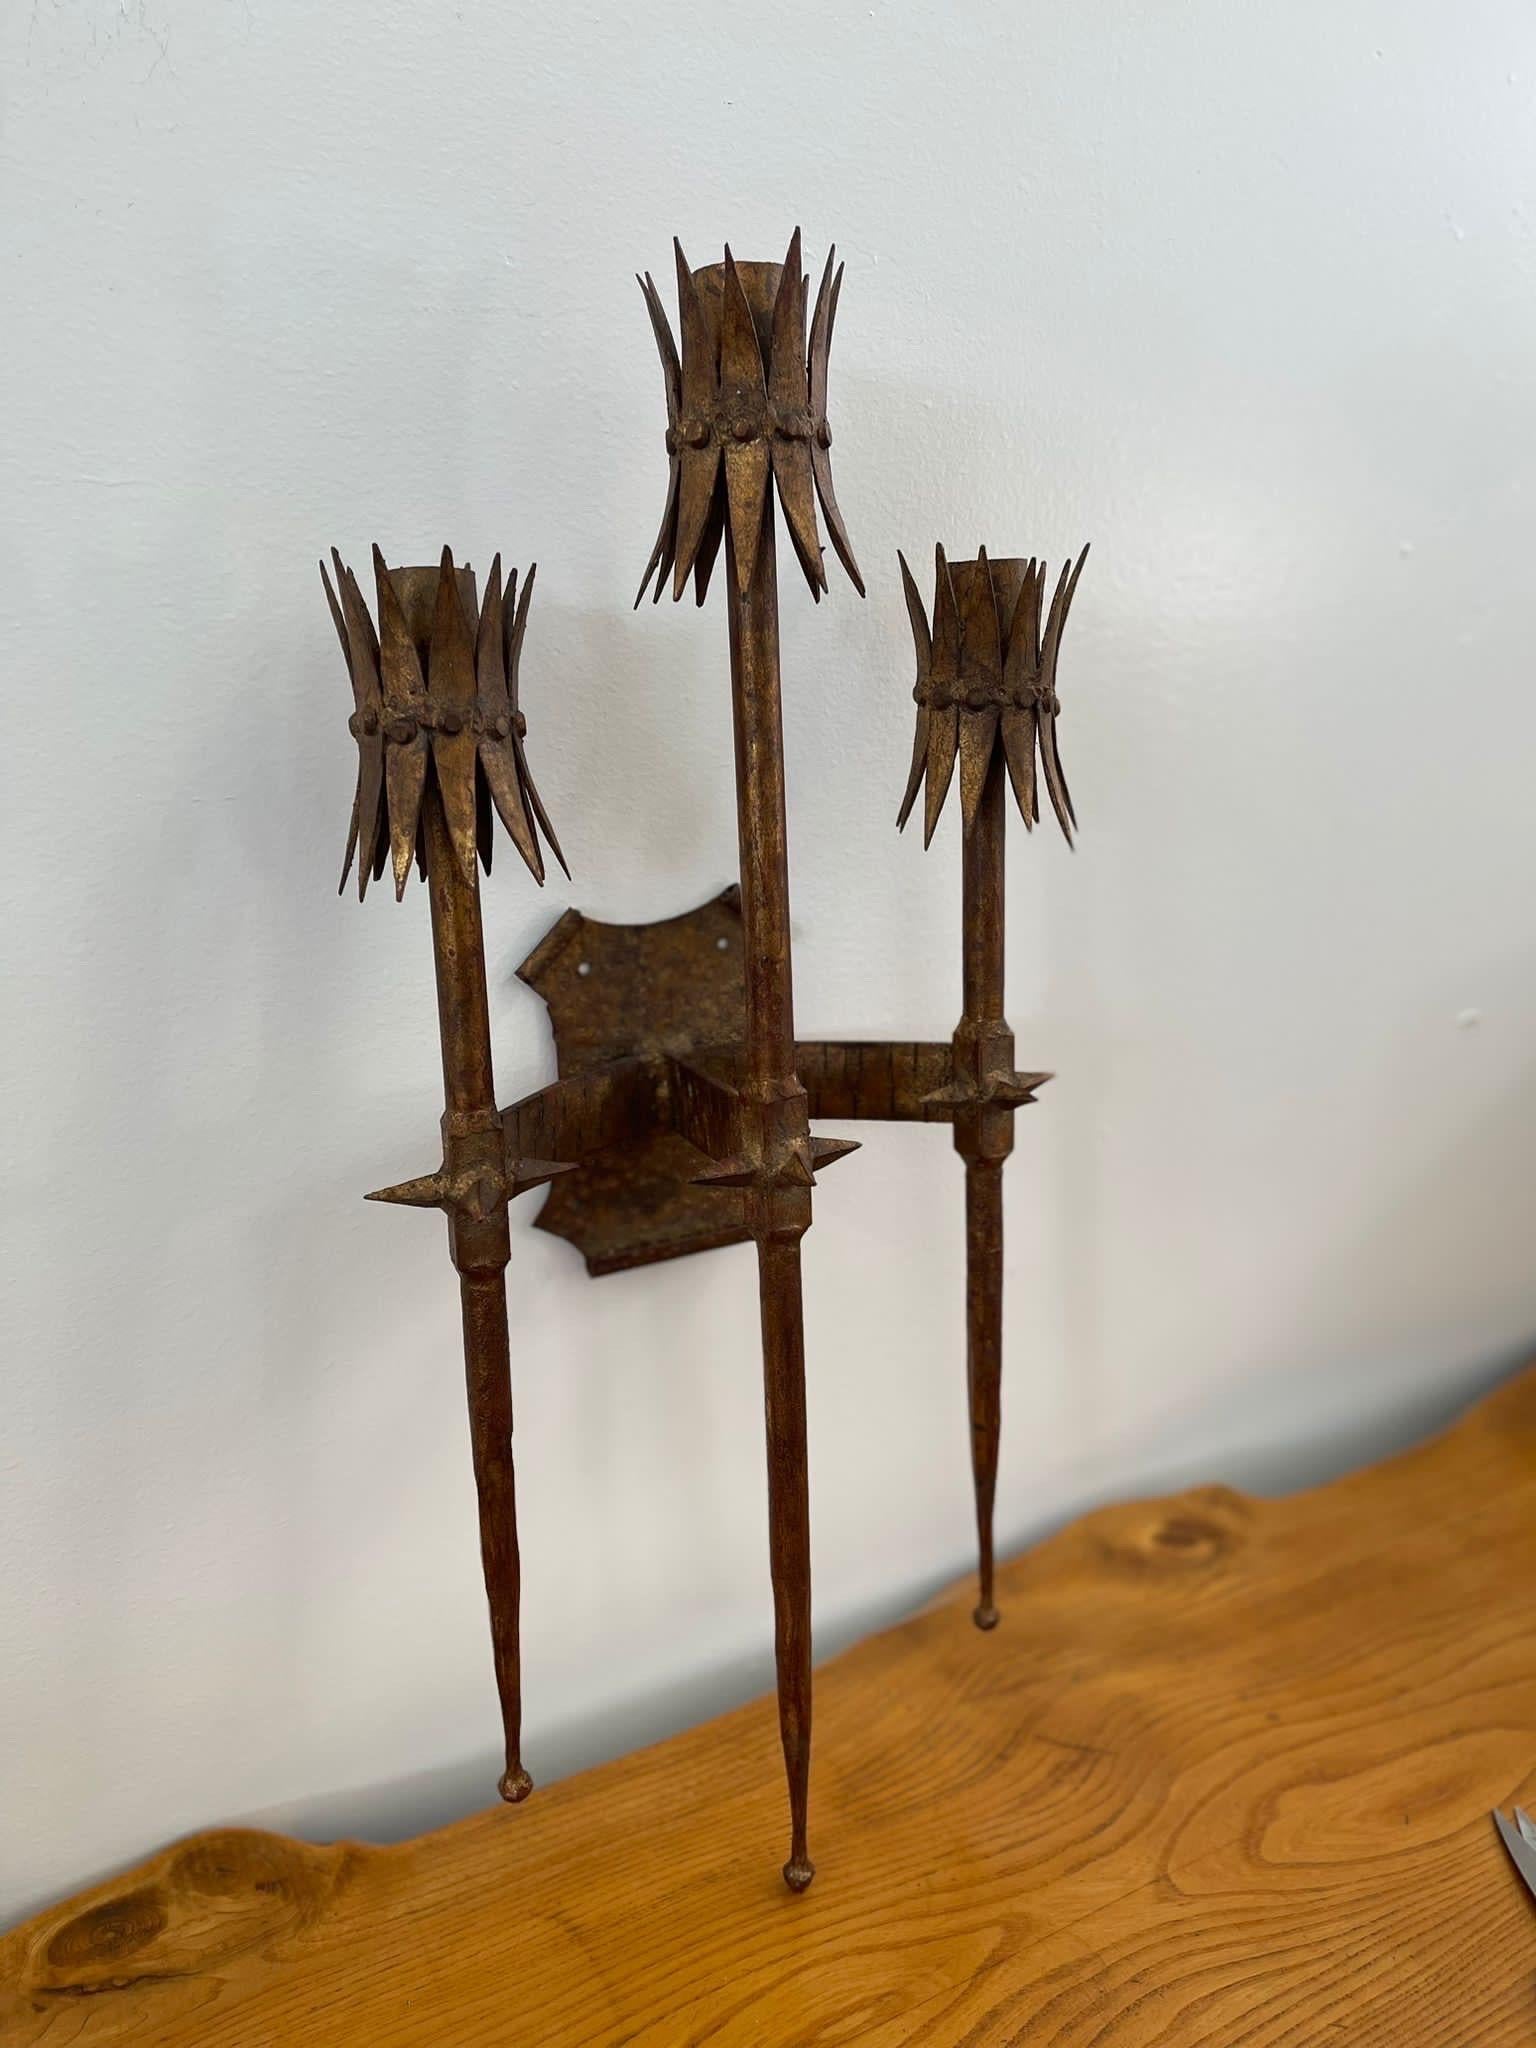 Three Pronged Wall Sconce . Possibly Spanish Based on Research. Spiked Poles That’s are pointed at the bottom. Back Plate has Holes to Place Screws Through.

Dimensions. 14 W ; 4 D ; 29 H